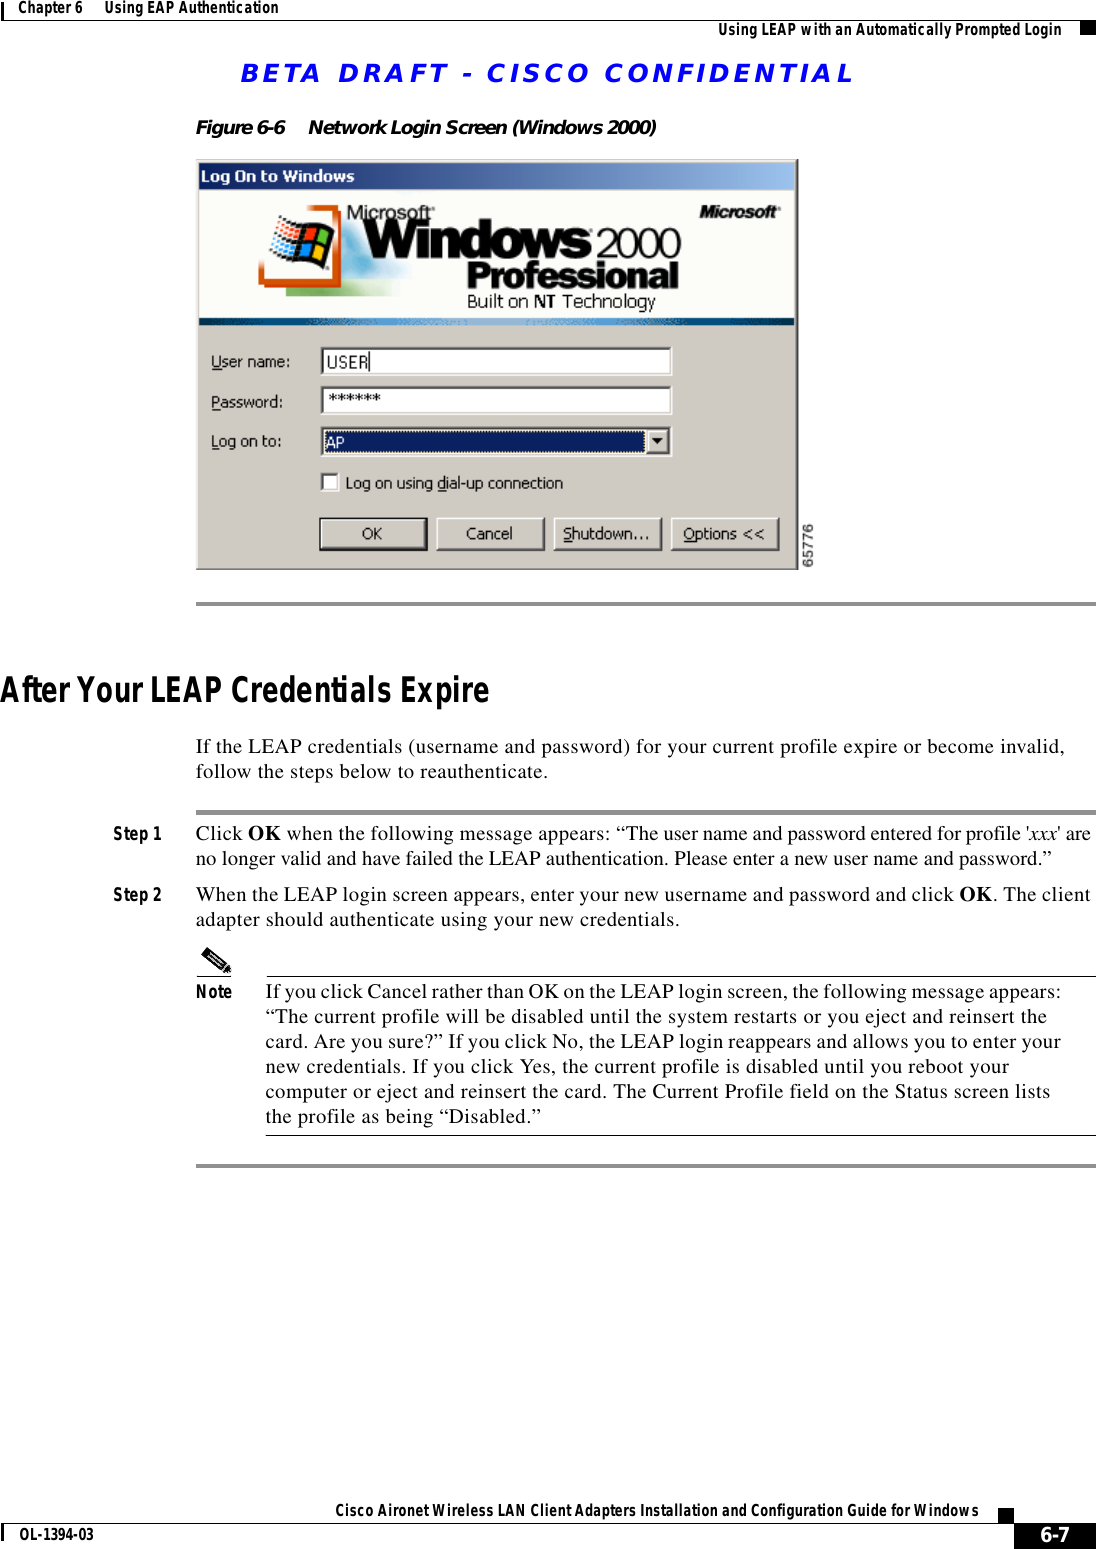 BETA DRAFT - CISCO CONFIDENTIAL6-7Cisco Aironet Wireless LAN Client Adapters Installation and Configuration Guide for WindowsOL-1394-03Chapter 6      Using EAP Authentication Using LEAP with an Automatically Prompted LoginFigure 6-6 Network Login Screen (Windows 2000)After Your LEAP Credentials ExpireIf the LEAP credentials (username and password) for your current profile expire or become invalid, follow the steps below to reauthenticate.Step 1 Click OK when the following message appears: “The user name and password entered for profile &apos;xxx&apos; are no longer valid and have failed the LEAP authentication. Please enter a new user name and password.”Step 2 When the LEAP login screen appears, enter your new username and password and click OK. The client adapter should authenticate using your new credentials.Note If you click Cancel rather than OK on the LEAP login screen, the following message appears: “The current profile will be disabled until the system restarts or you eject and reinsert the card. Are you sure?” If you click No, the LEAP login reappears and allows you to enter your new credentials. If you click Yes, the current profile is disabled until you reboot your computer or eject and reinsert the card. The Current Profile field on the Status screen lists the profile as being “Disabled.”